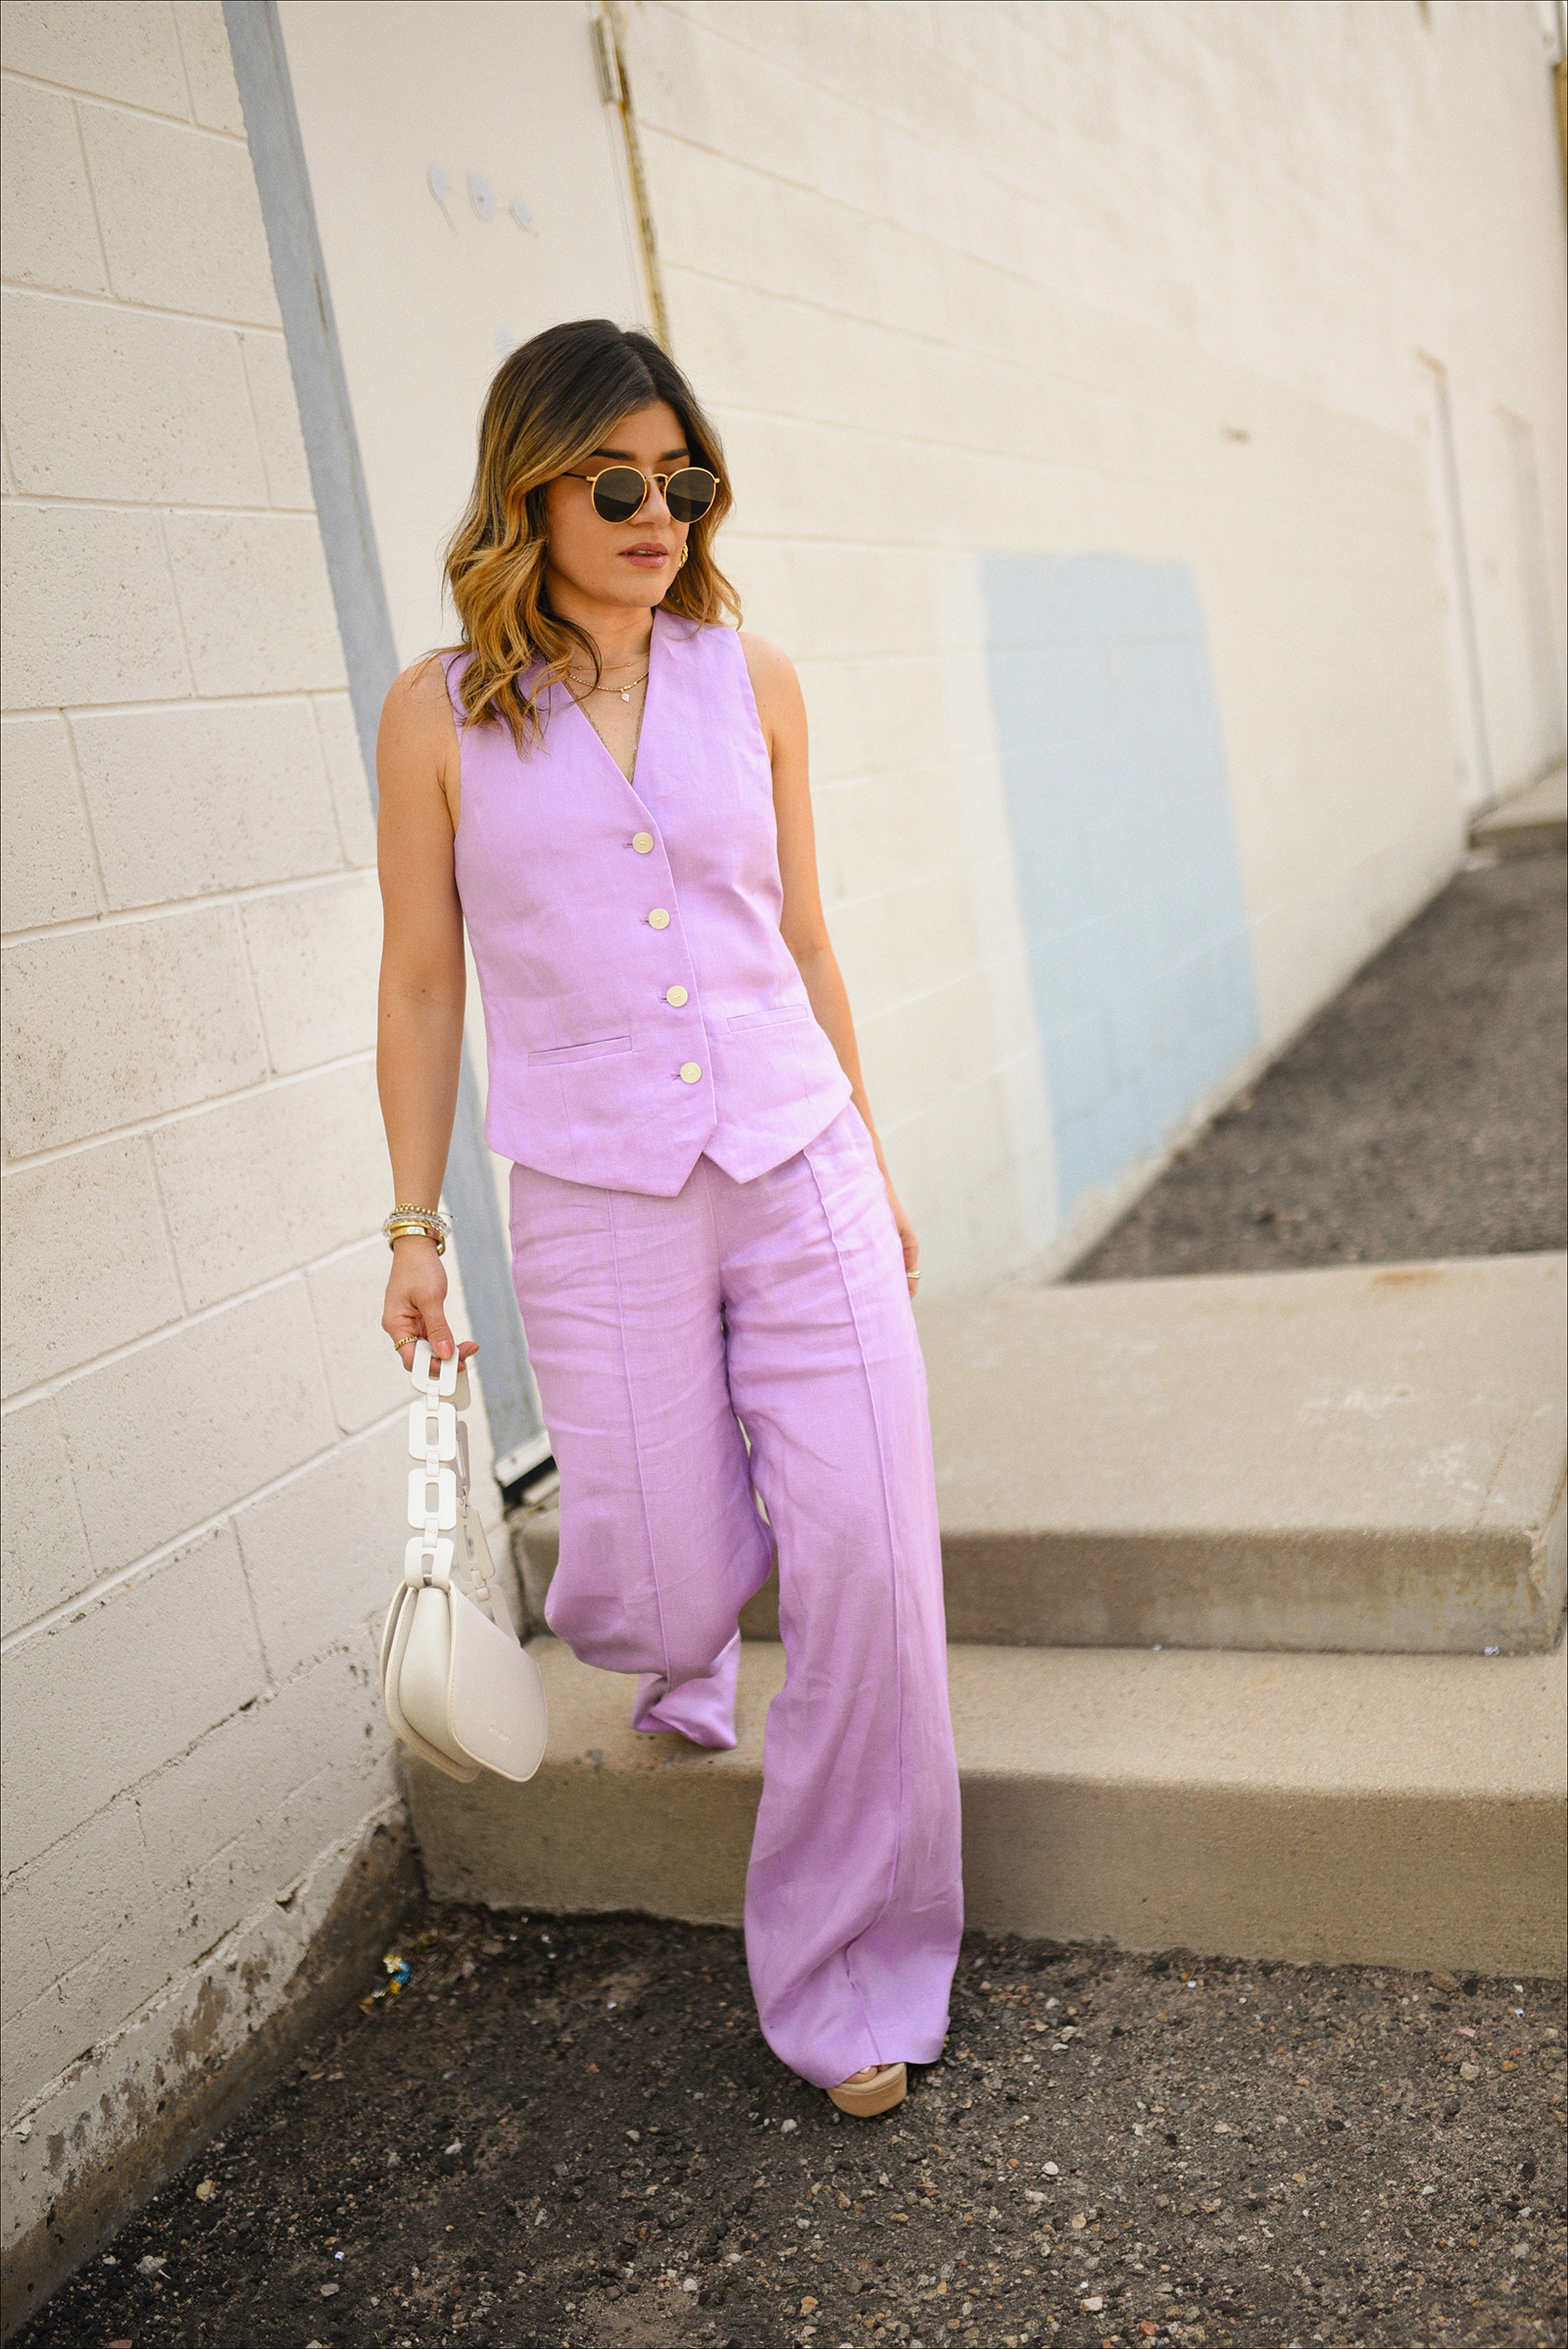 Carolina Hellal of Chic Talk wearing a pink linen set from Mango, Melie Bianco white shoulder bag, Vince Camuto nude sandals, and rounded Rayban sunglasses